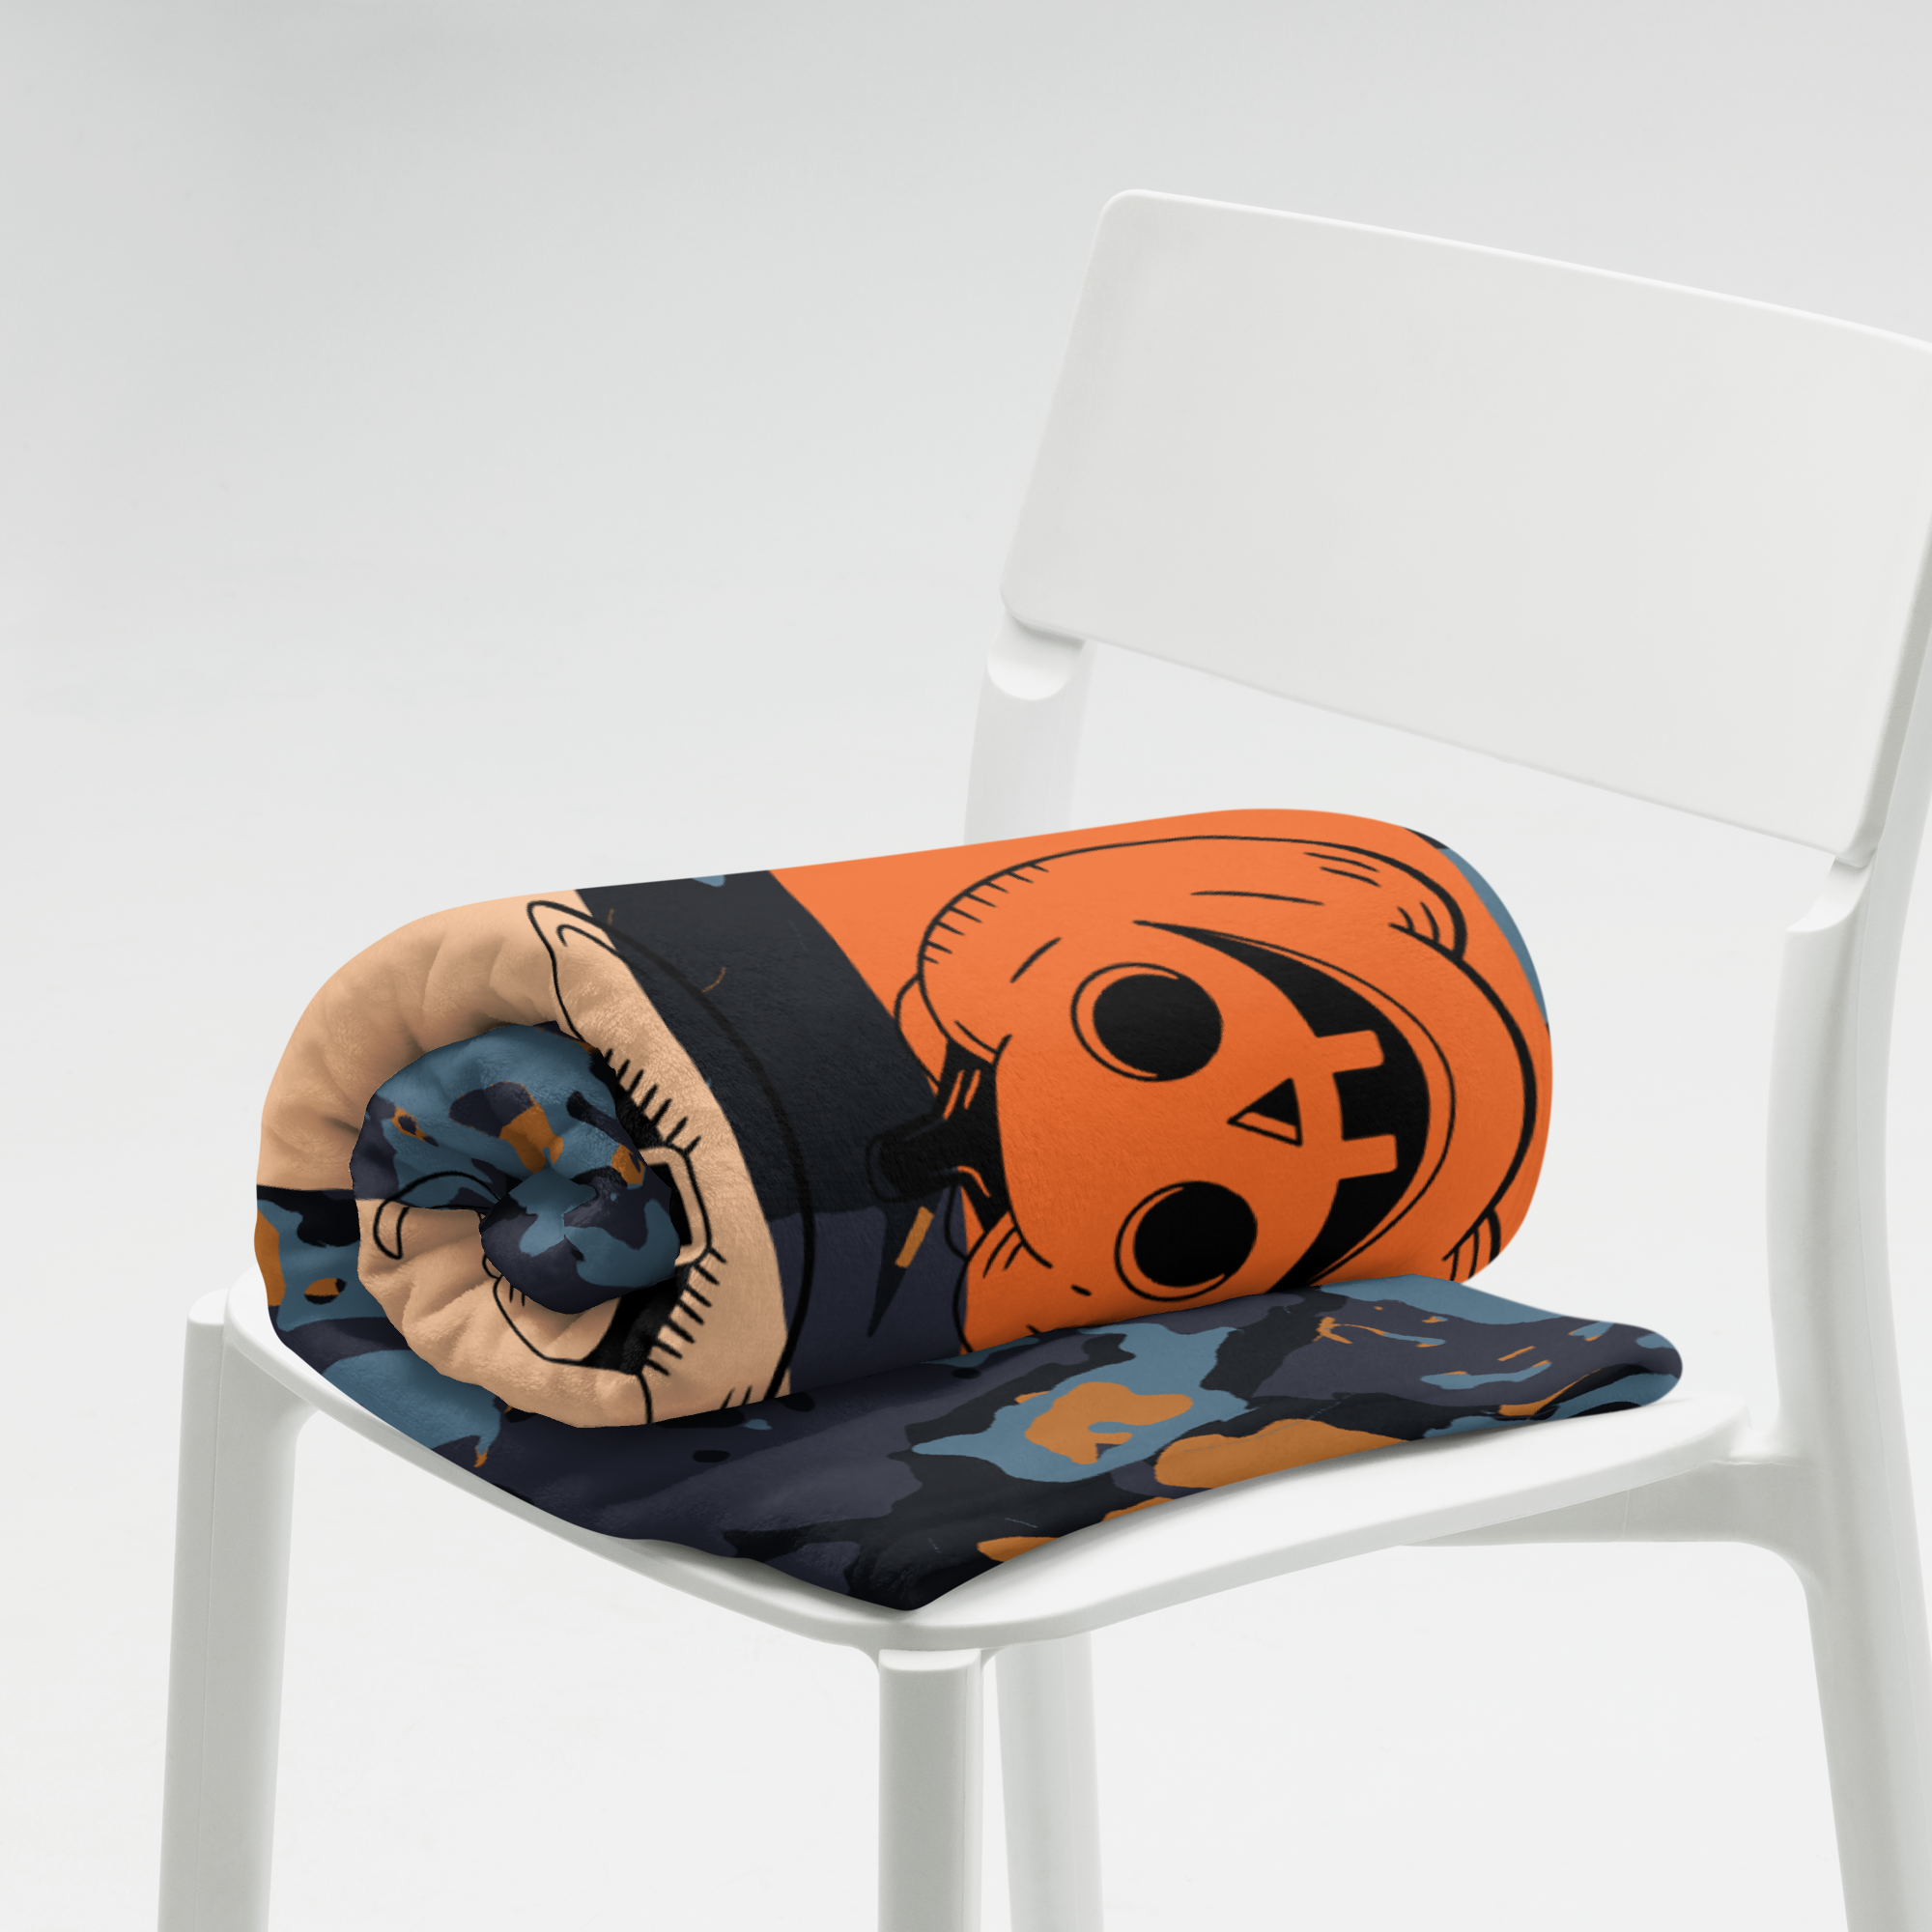 Be SPOOKY! Halloween 2022 Limited Edition Throw Blanket (60"x80")